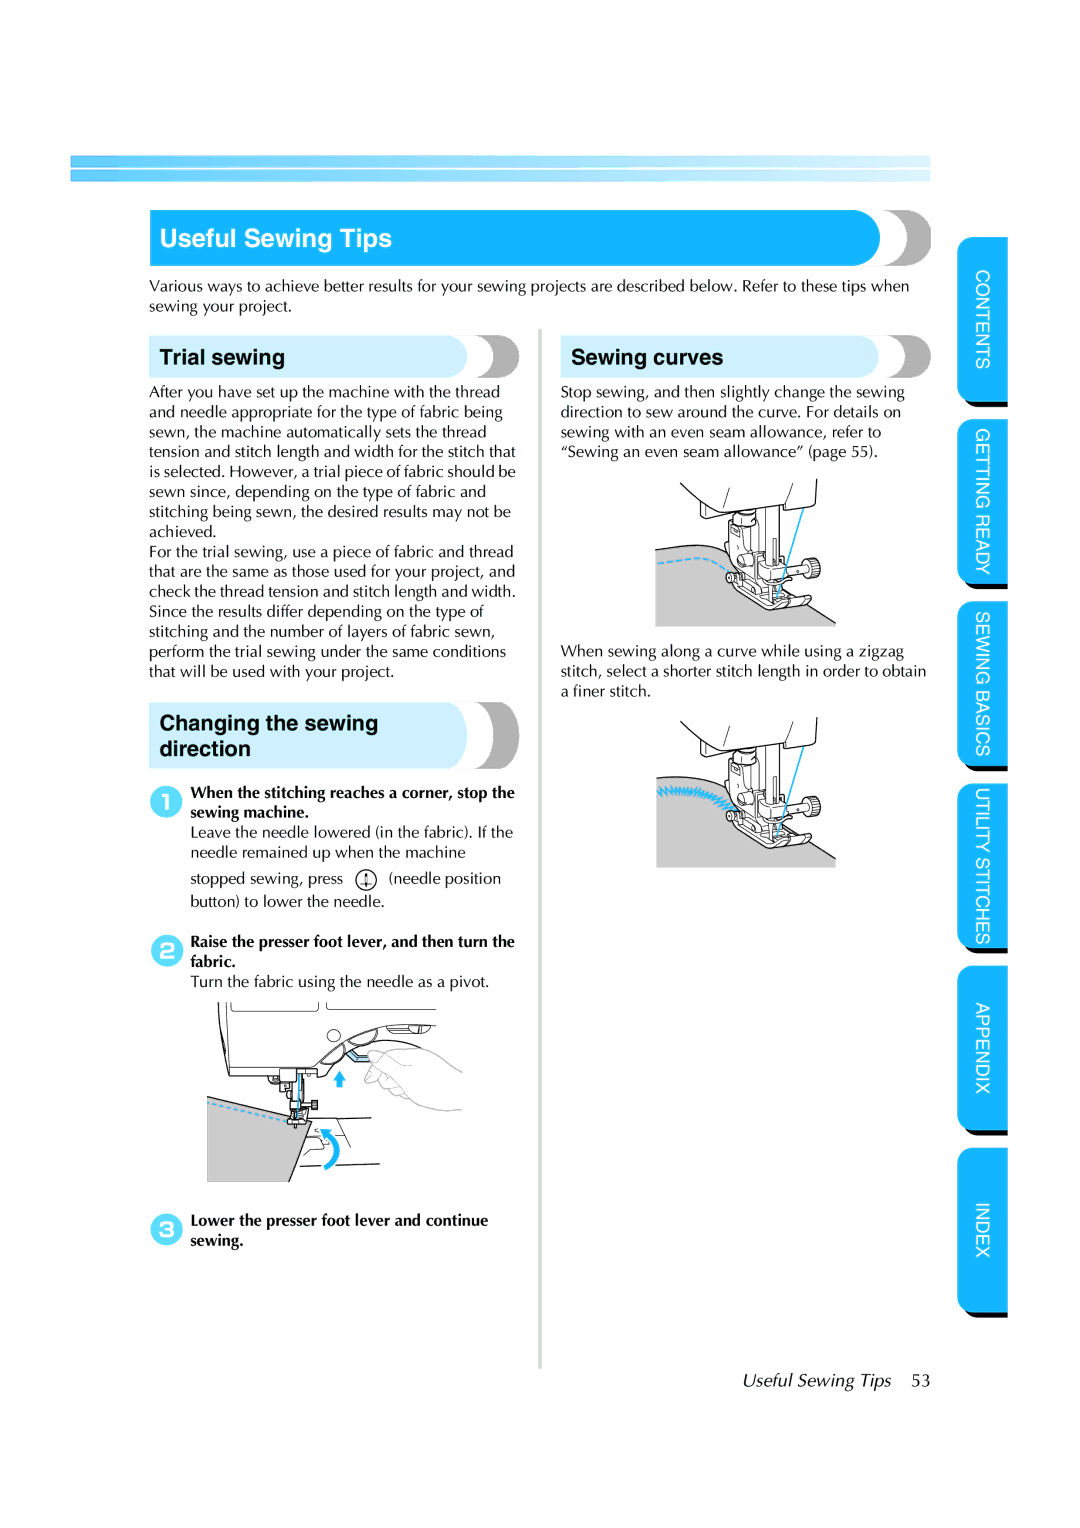 Brother CS 8060 manual Useful Sewing Tips, Trial sewing, Changing the sewing direction, Sewing curves 